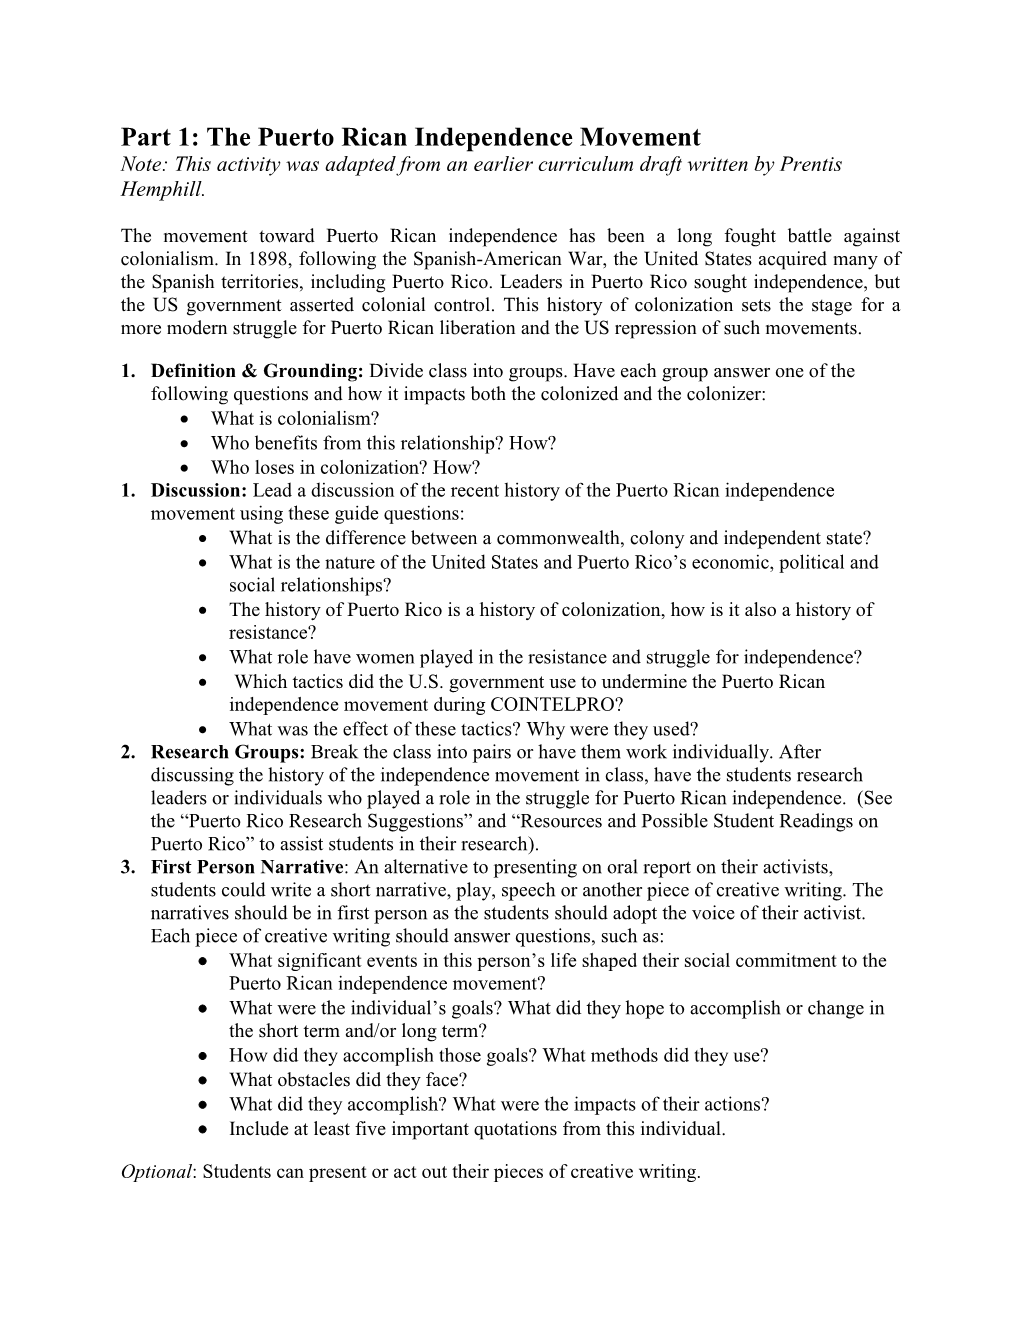 The Puerto Rican Independence Movement Note: This Activity Was Adapted from an Earlier Curriculum Draft Written by Prentis Hemphill